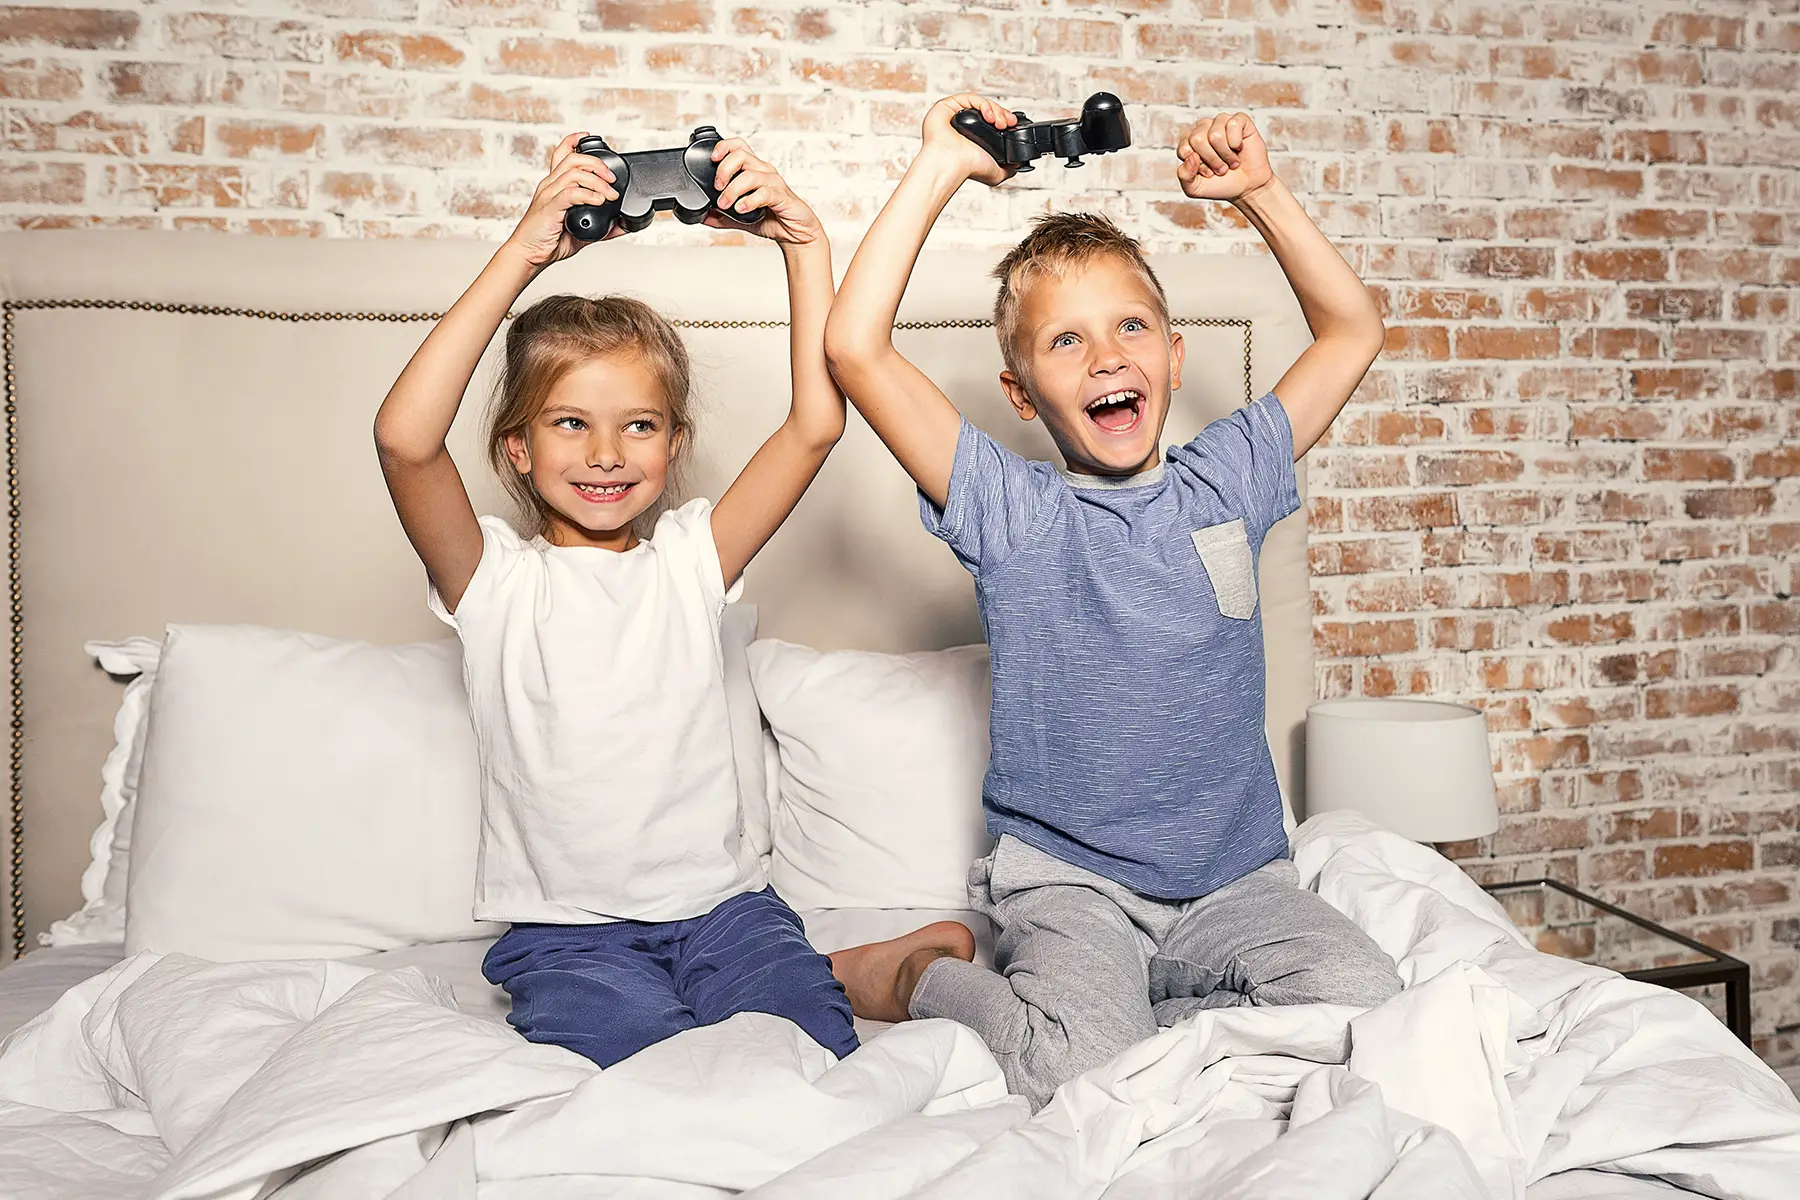 Young children playing videogames